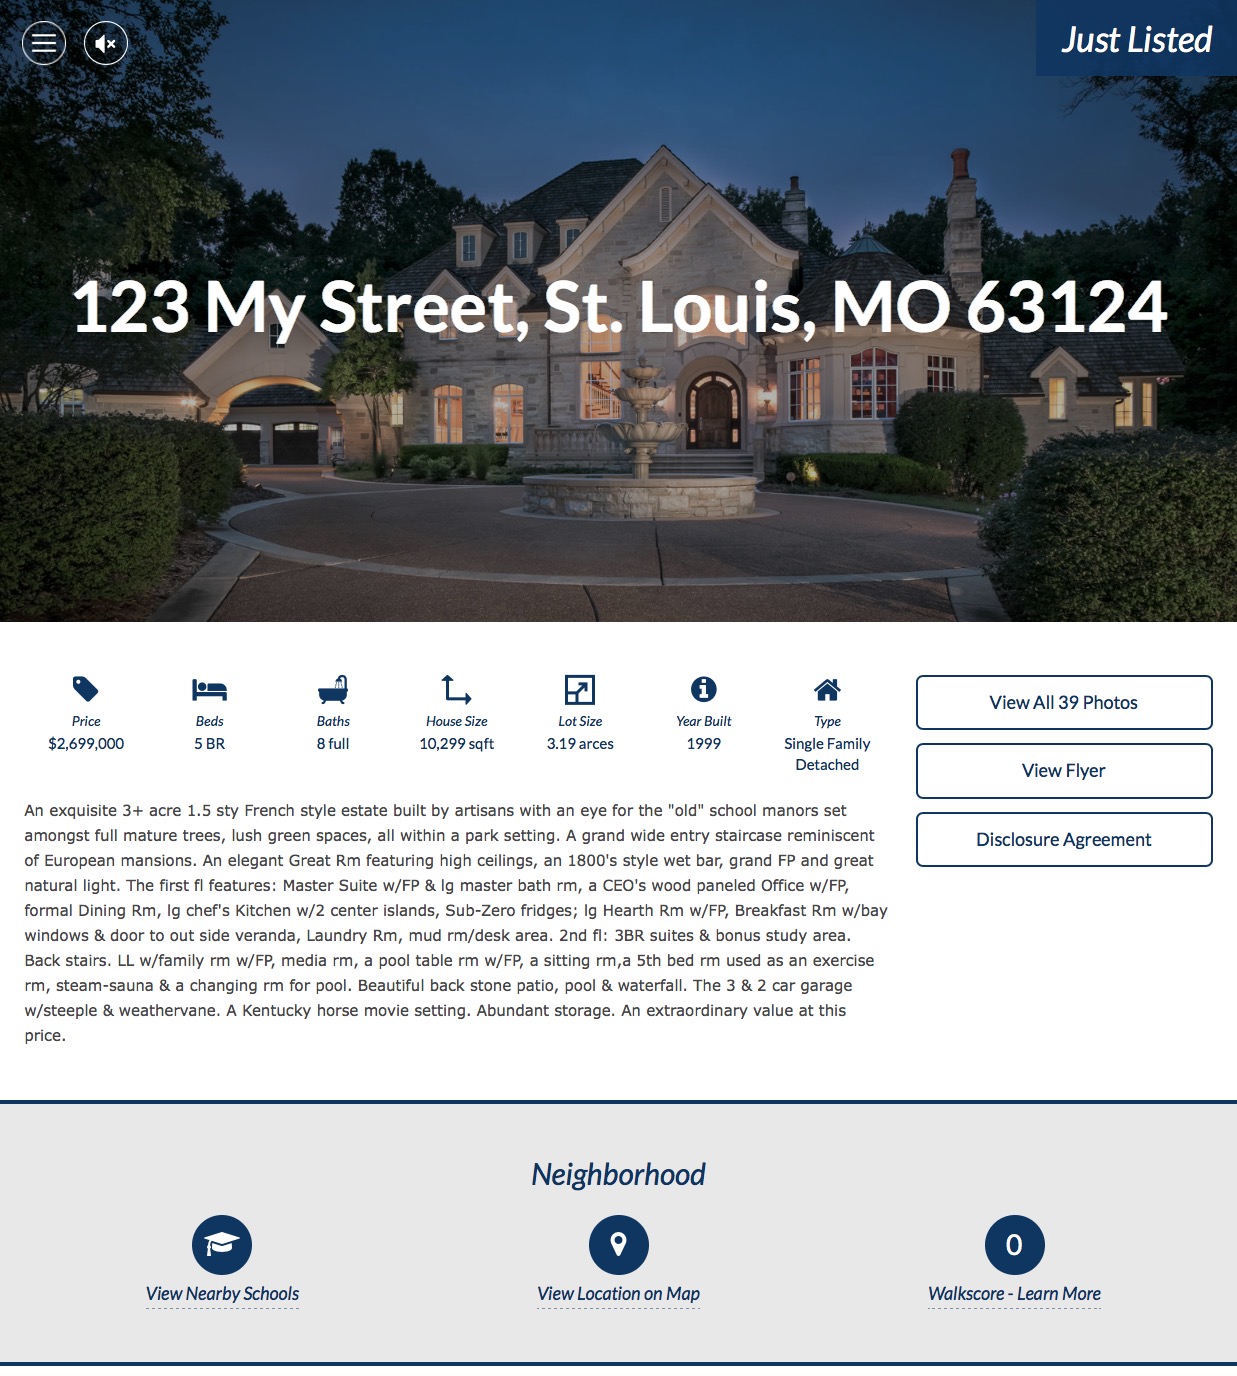 St Louis Residential Real Estate Property Website